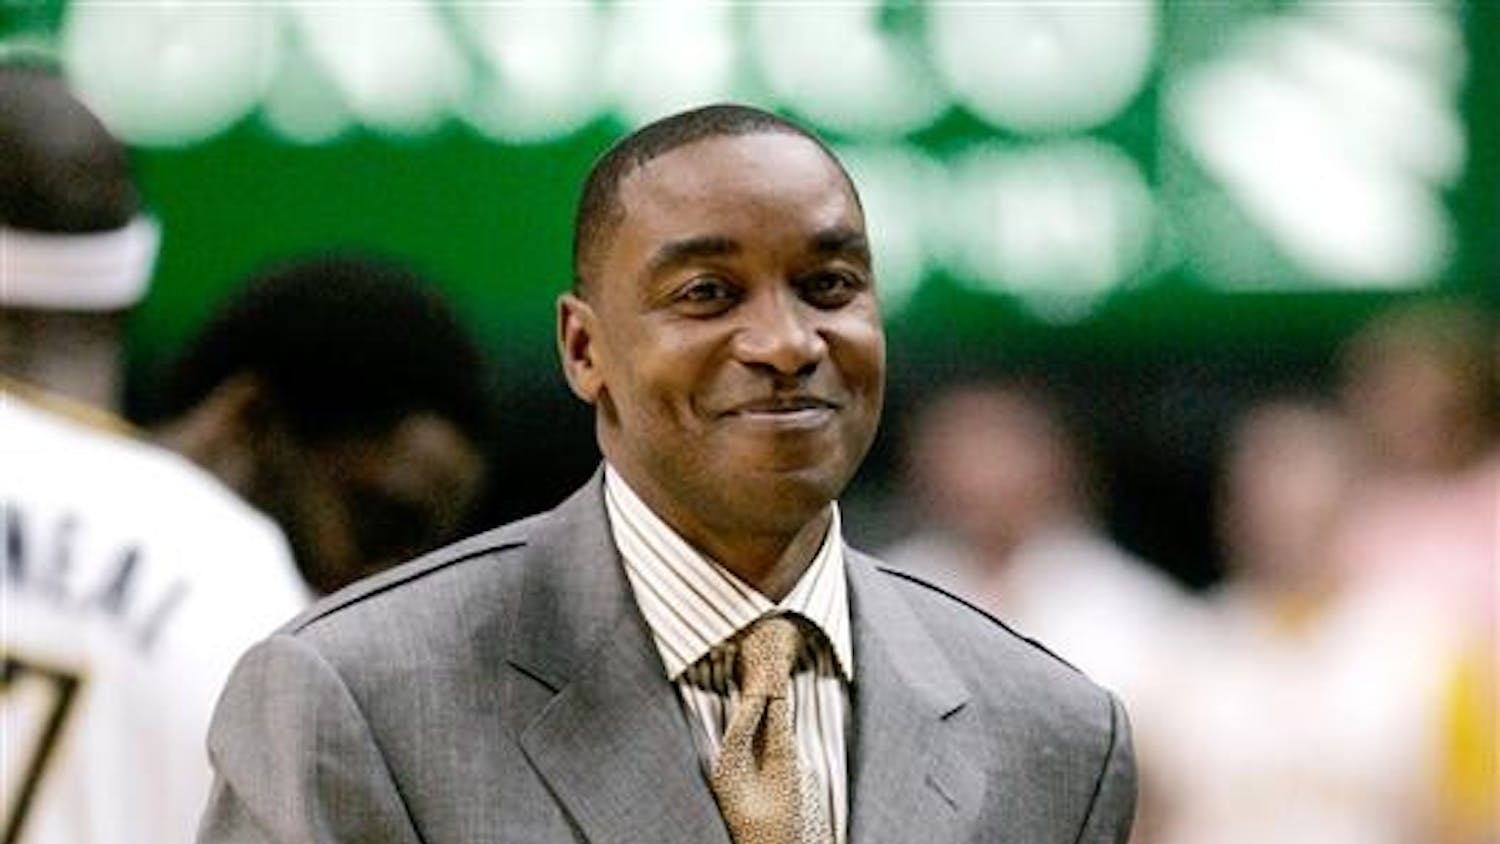 In this April 16, 2008 file photo former New York Knicks coach Isiah Thomas smiles before a basketball game in Indianapolis. Thomas has accepted the job as Florida International's basketball coach. The school said Tuesday, April 14, 2009 that Thomas signed a five-year contract.